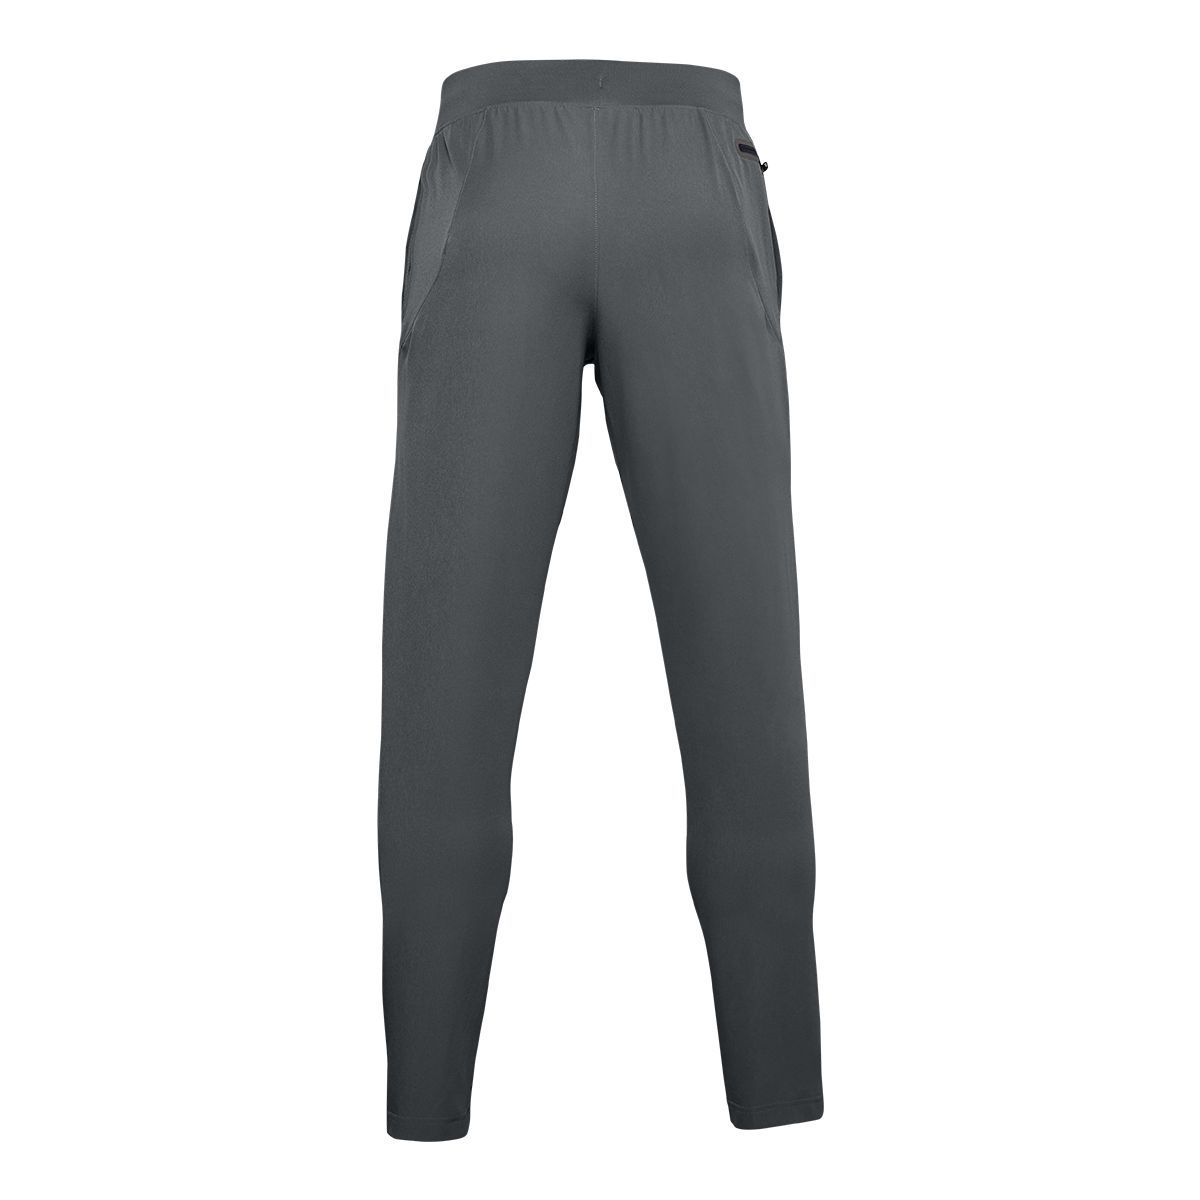 Under Armour Mens Stretch Woven Utility Tapered Workout Pants Pant, Pants -   Canada